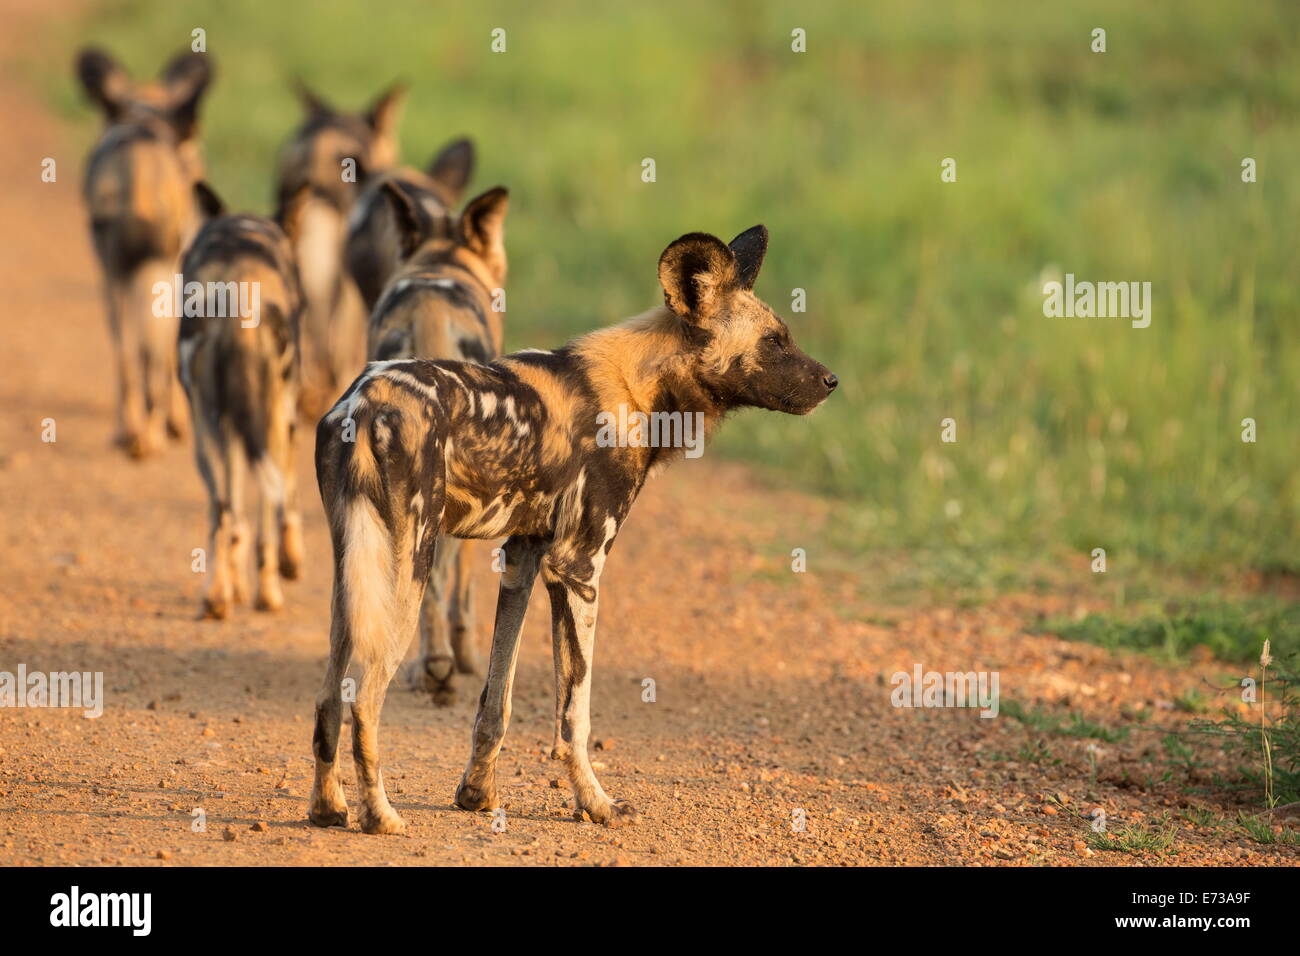 African wild dogs (Lycaon pictus), Madikwe Game Reserve, North West province, South Africa, Africa Stock Photo